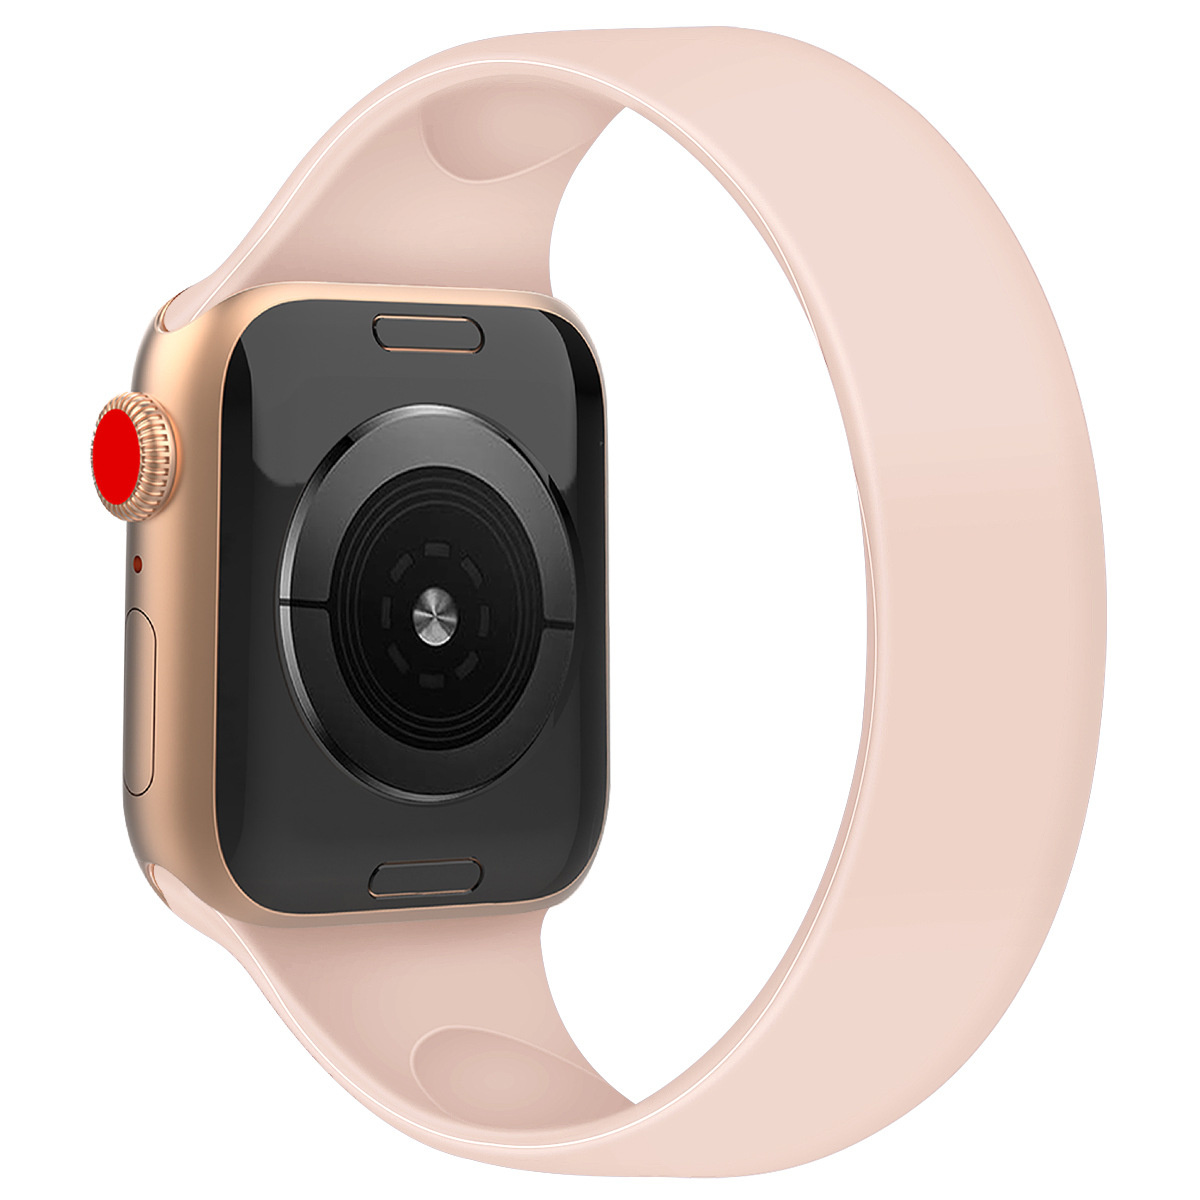 Apple Watch sport solo loop band - pink sand